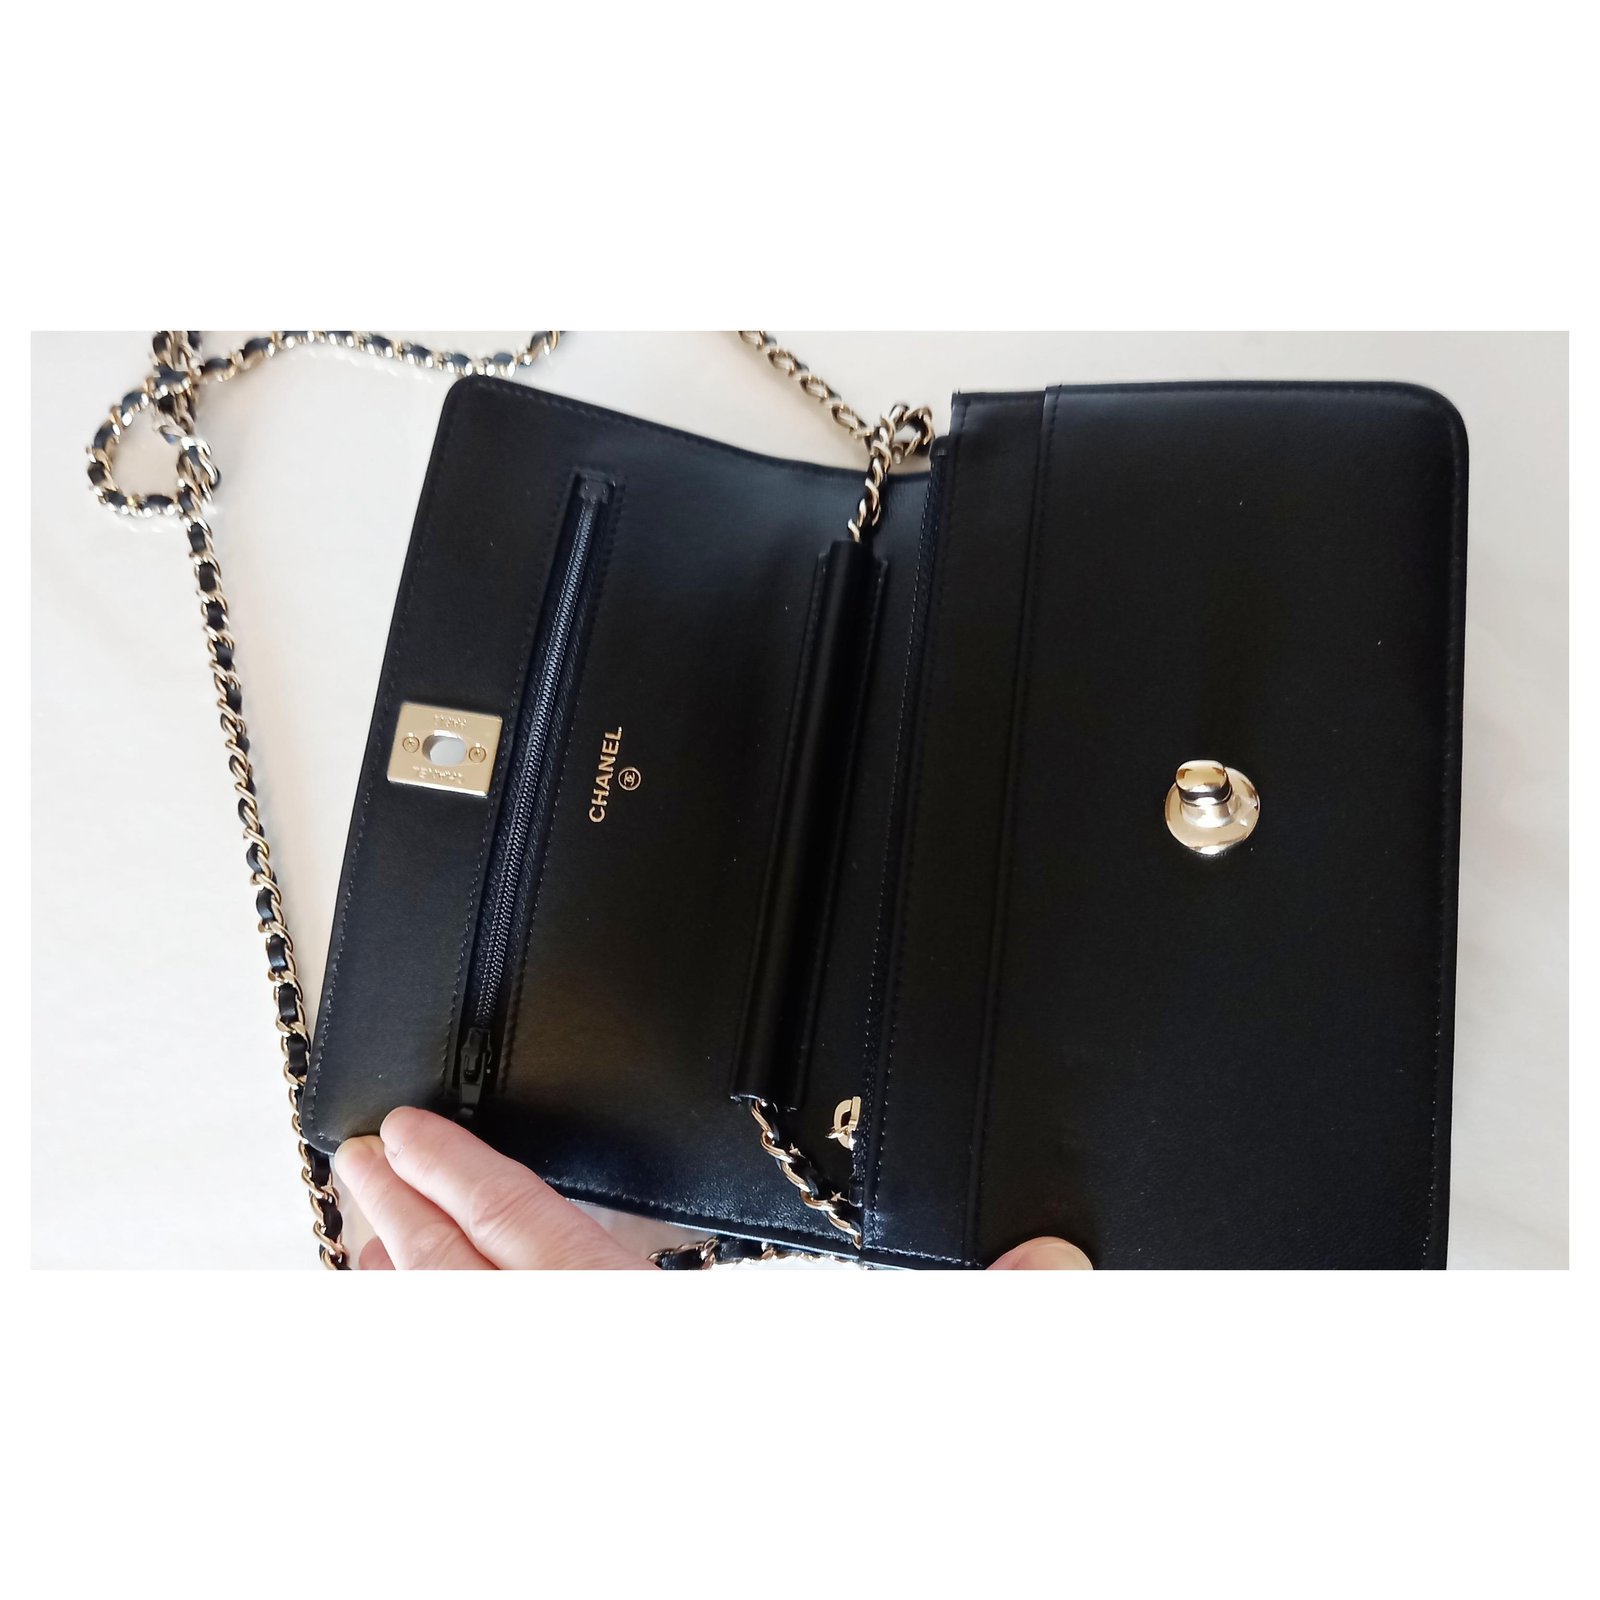 Wallet on Chain - Black - Lambskin & Gold-Tone Metal - Default view - see  full sized version